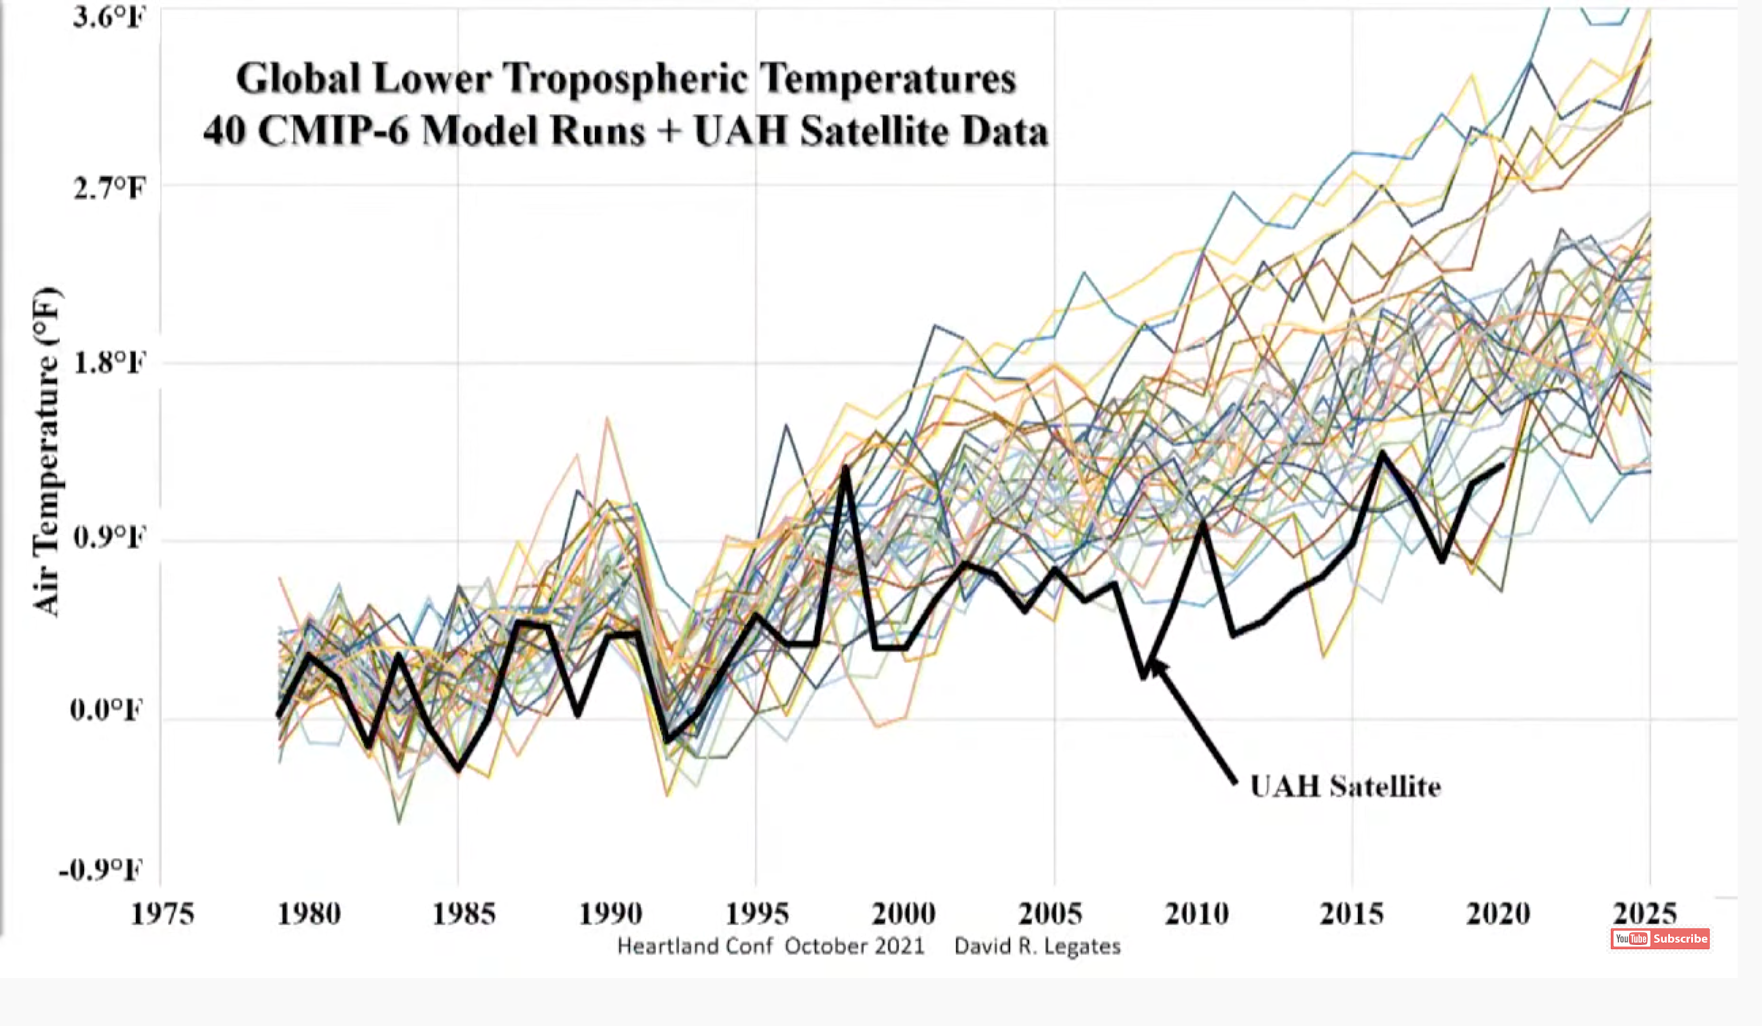 Swiss Analysis: Climate Models Running Too Warm, Falsely Calibrated…IPCC Needs “To Review Its Findings”